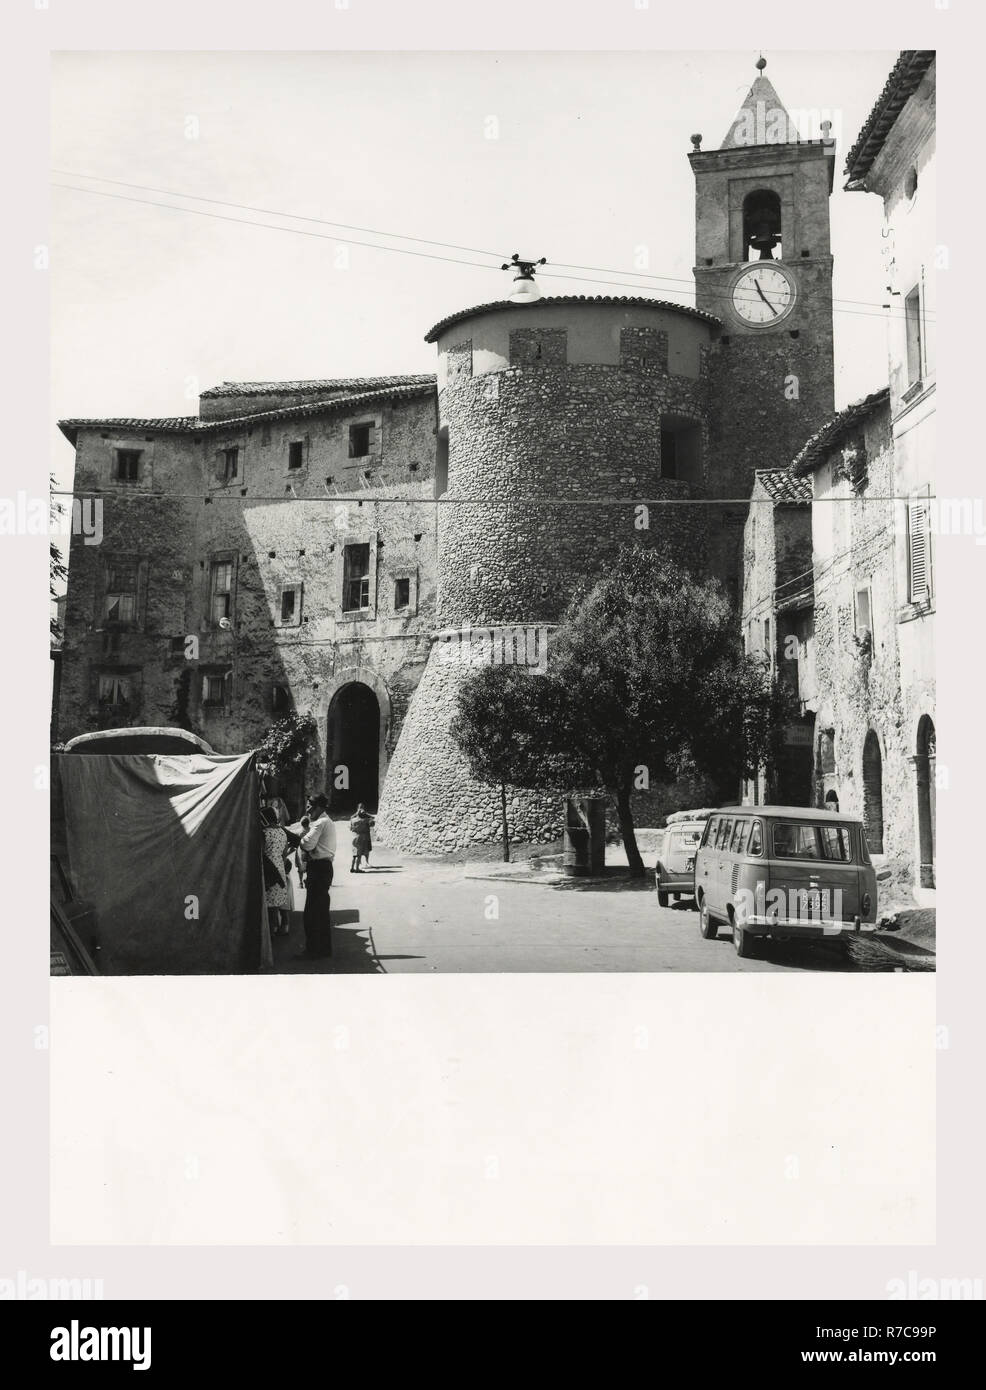 Lazio Rieti Torricella in Sabina Borgo Medievale, this is my Italy, the italian country of visual history, Medieval Architecture. The entrance to the medieval town opens upon a large circular tower dating to the 12th century, which formed a part of the castle of the Brancaleone. Stock Photo